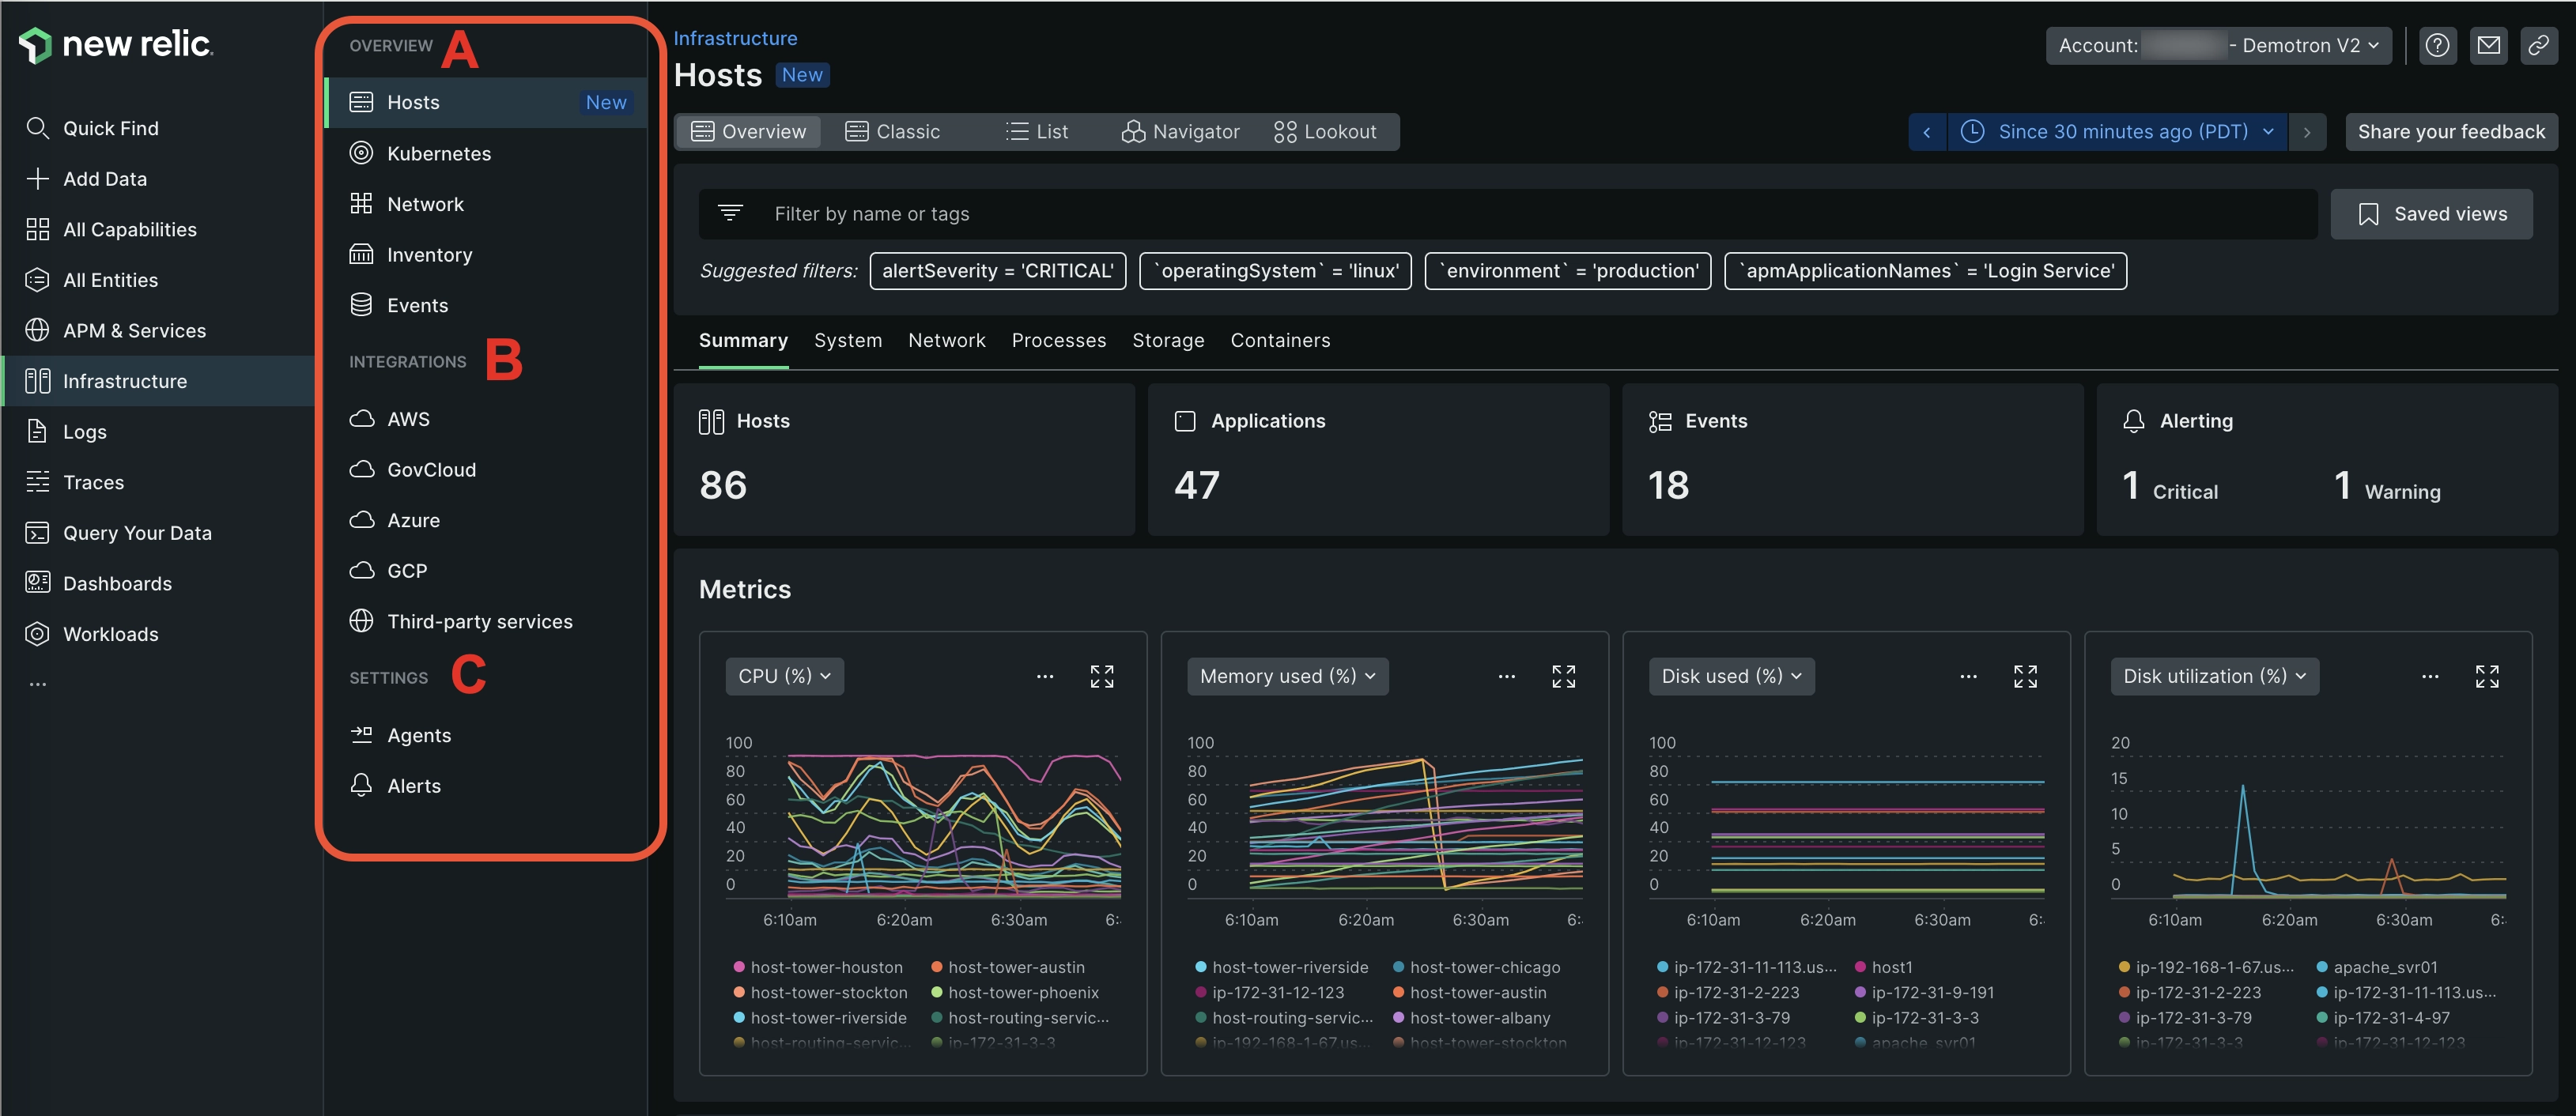 New Relic - Infrastructure Monitoring